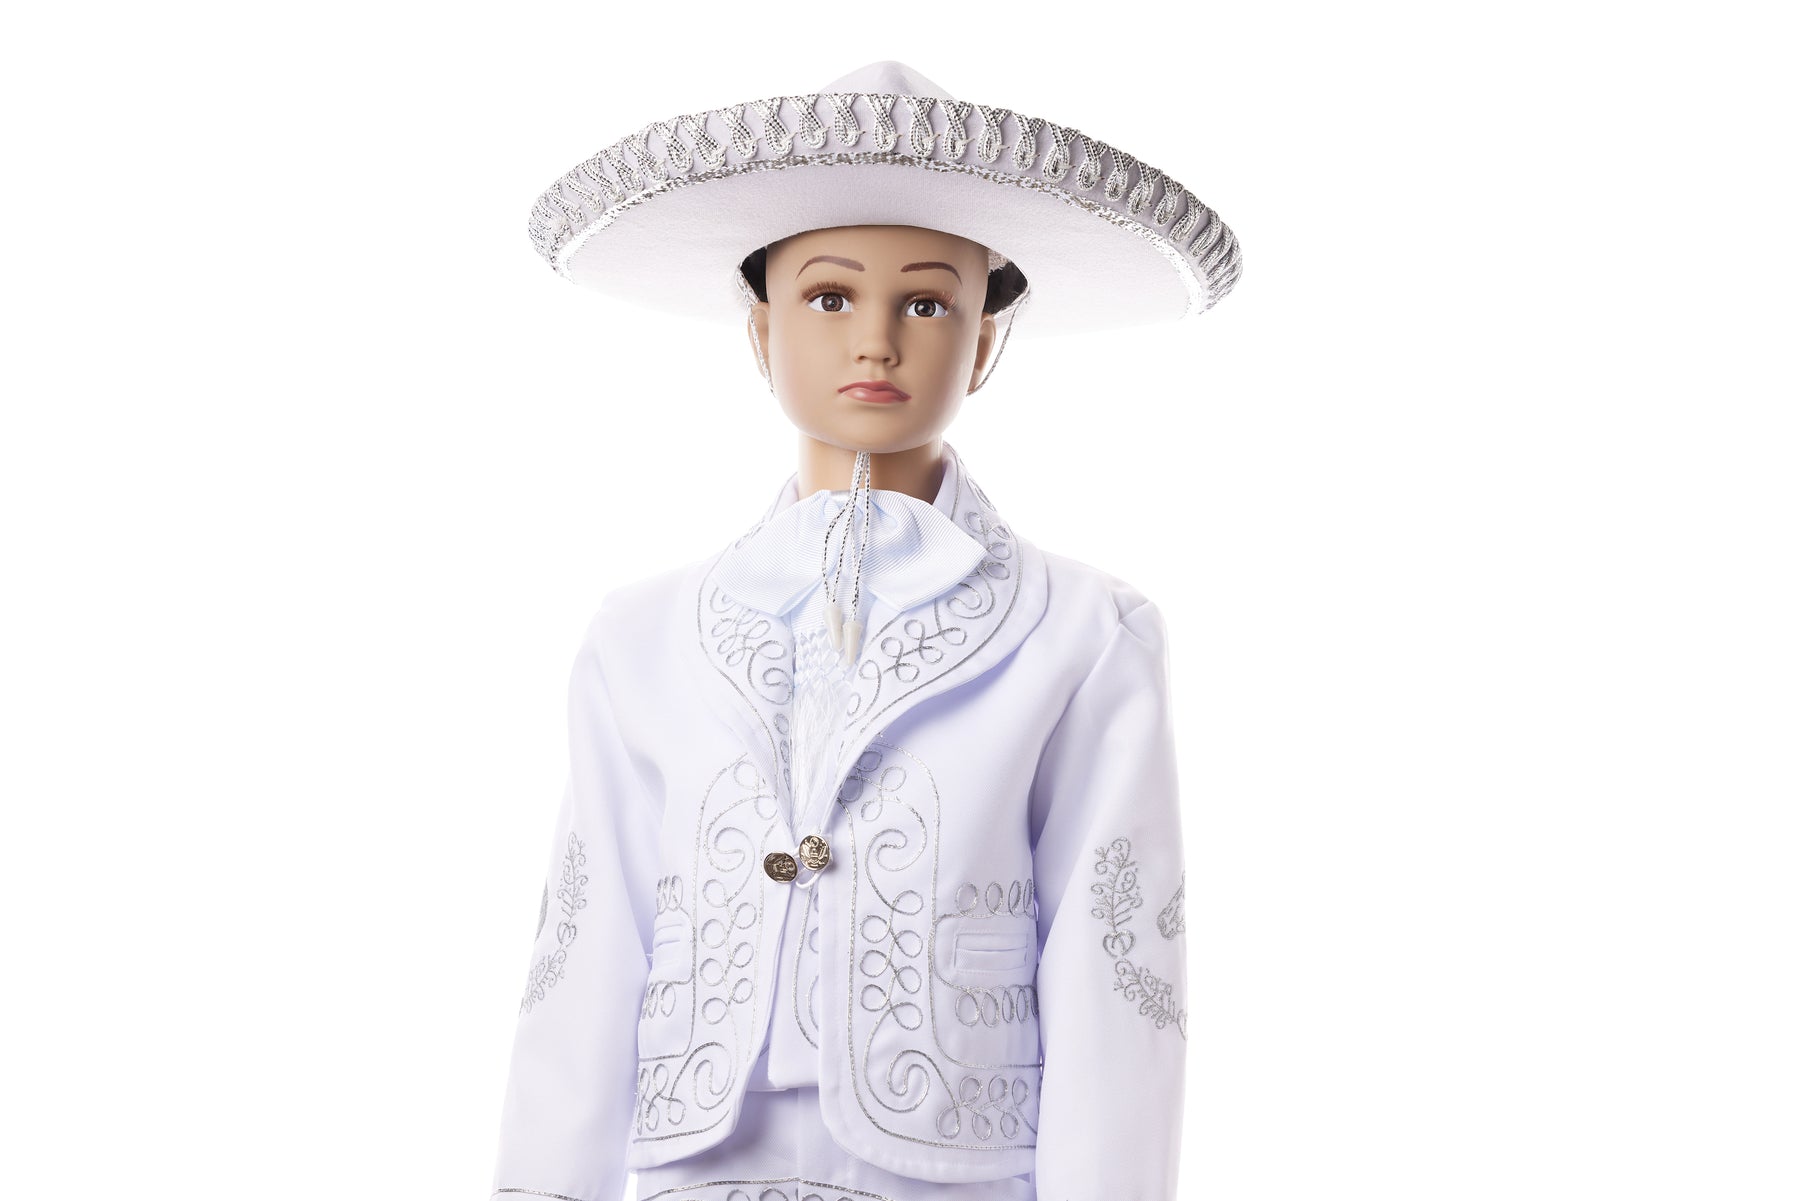 Boys Charro Baptism Outfit - White / Silver - Horse